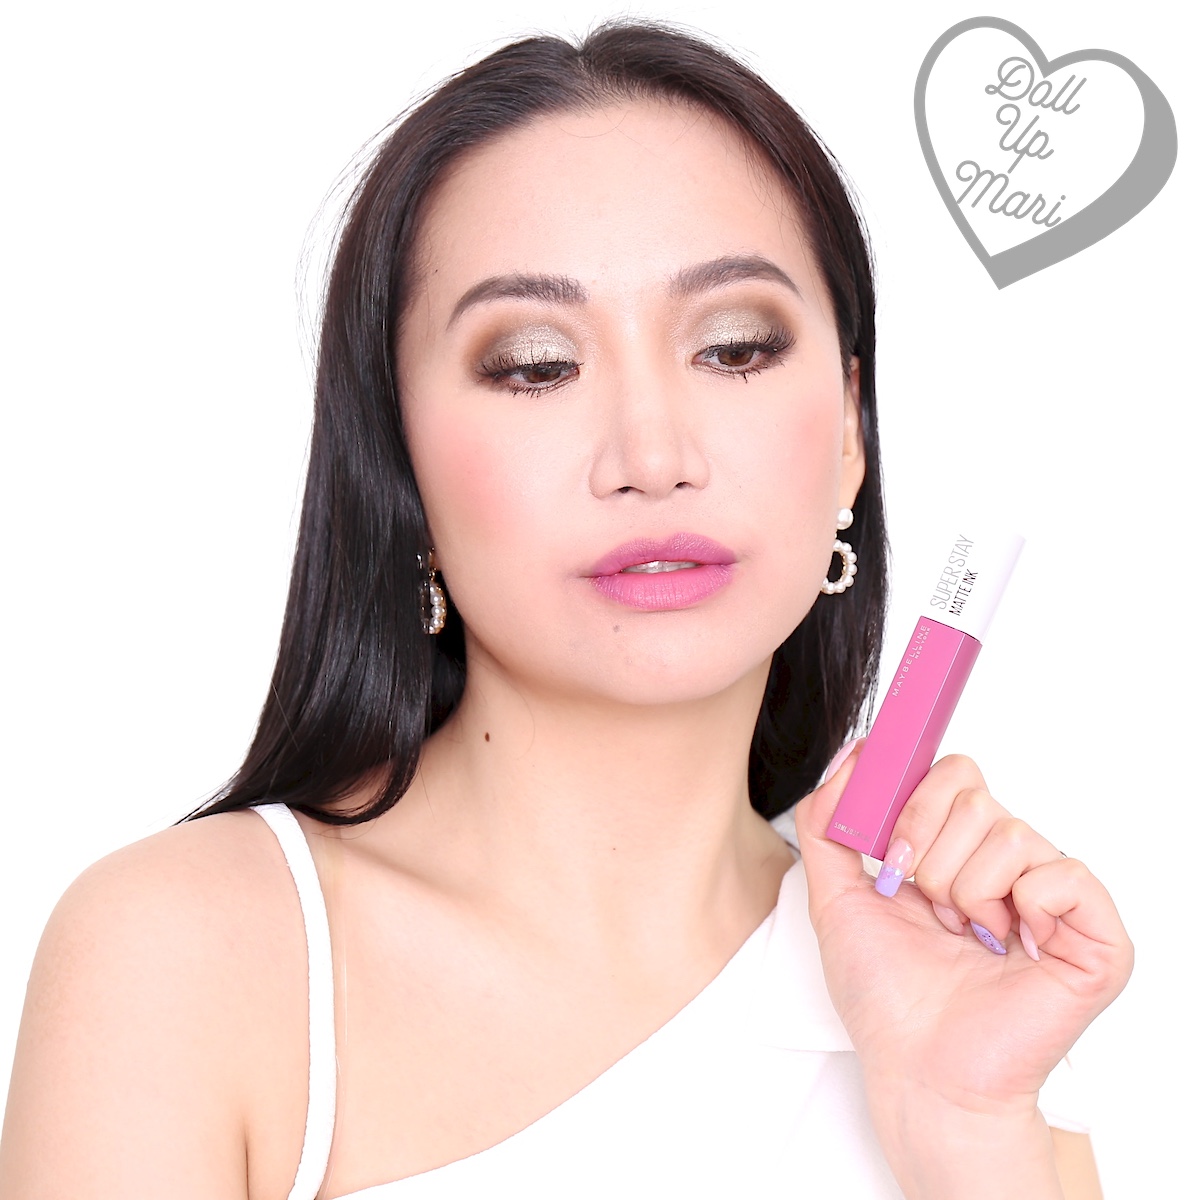 945 Dominant vangst Maybelline Superstay Matte Ink Liquid Lipstick Pinks Edition (165  Successful) Review, Swatch, Price | Doll Up Mari